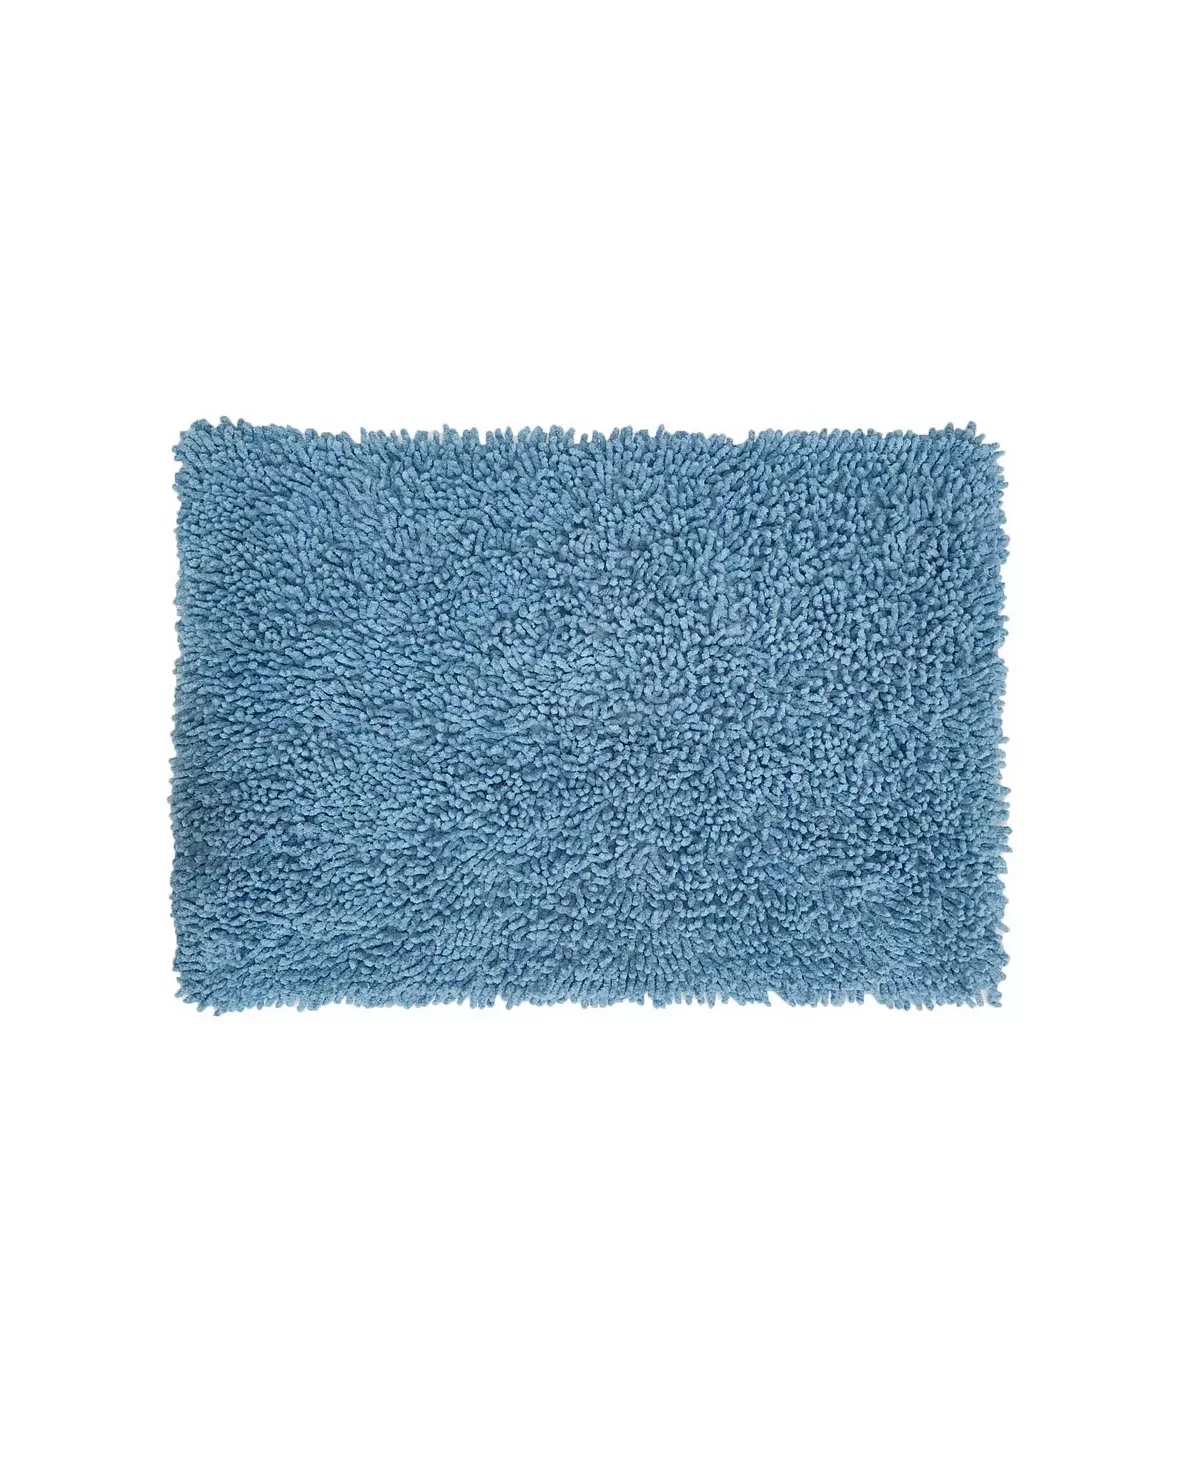 Home Weavers Inc Fantasia Quick Dry 17X24 Inch Bath Rug, One Size, Blue